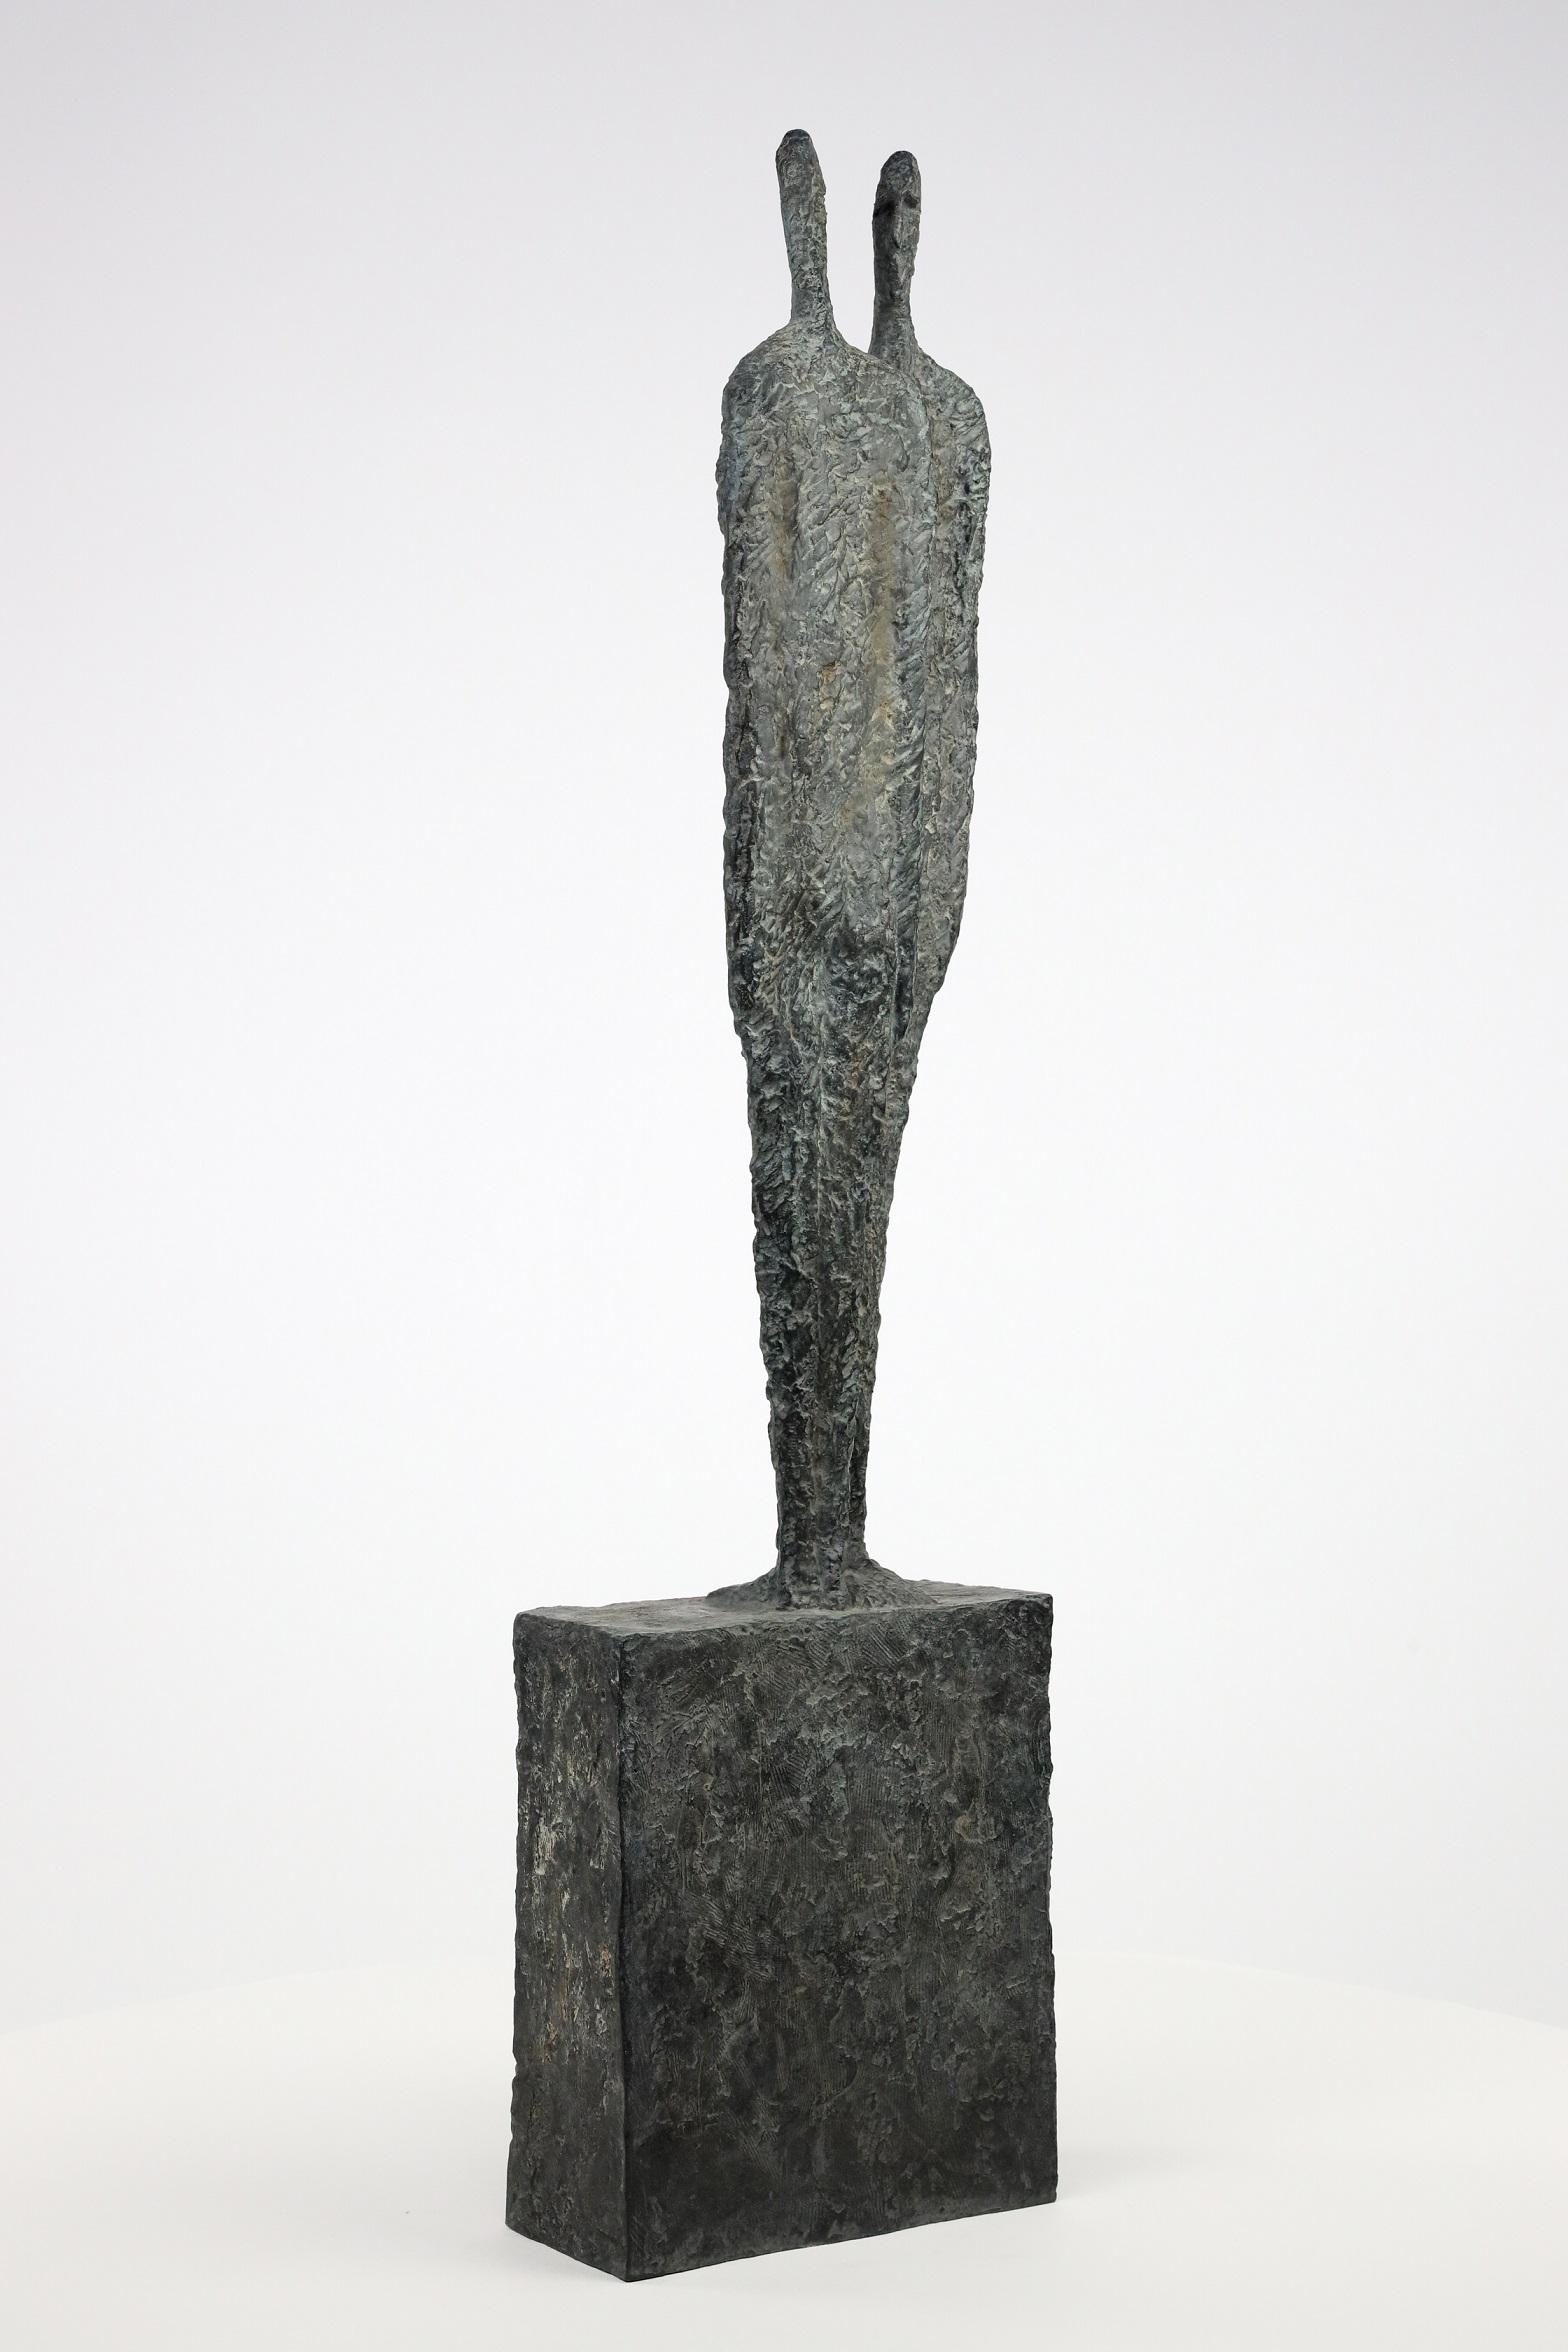 The Great Secret by Martine Demal - Contemporary bronze sculpture, human figure For Sale 2